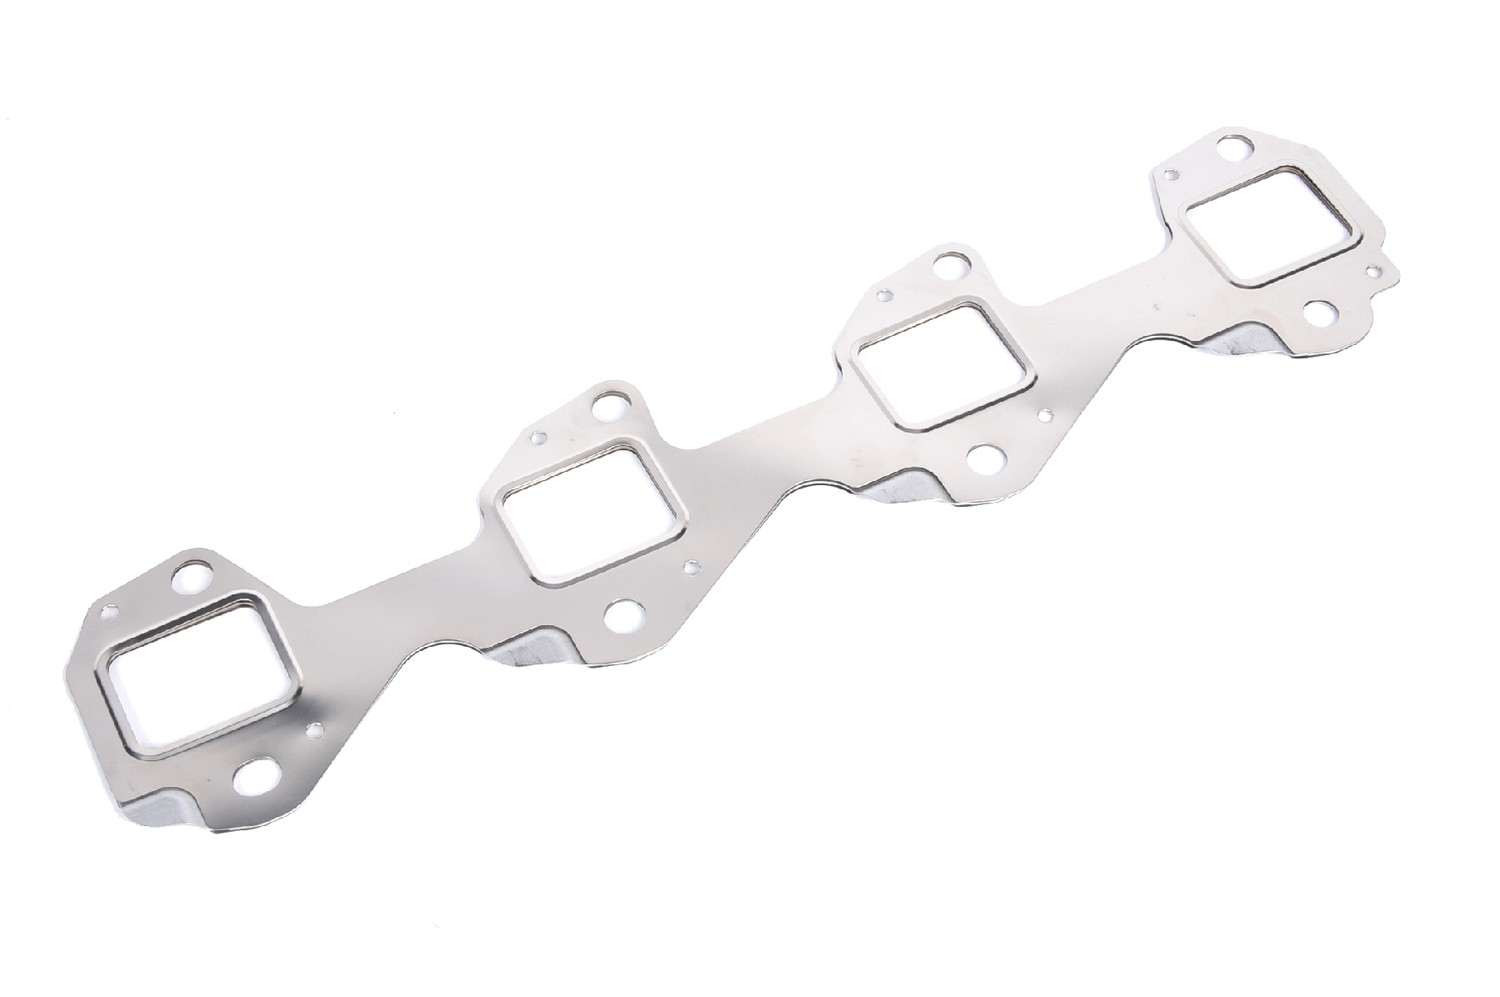 GM GENUINE PARTS - Exhaust Manifold Gasket - GMP 98002804